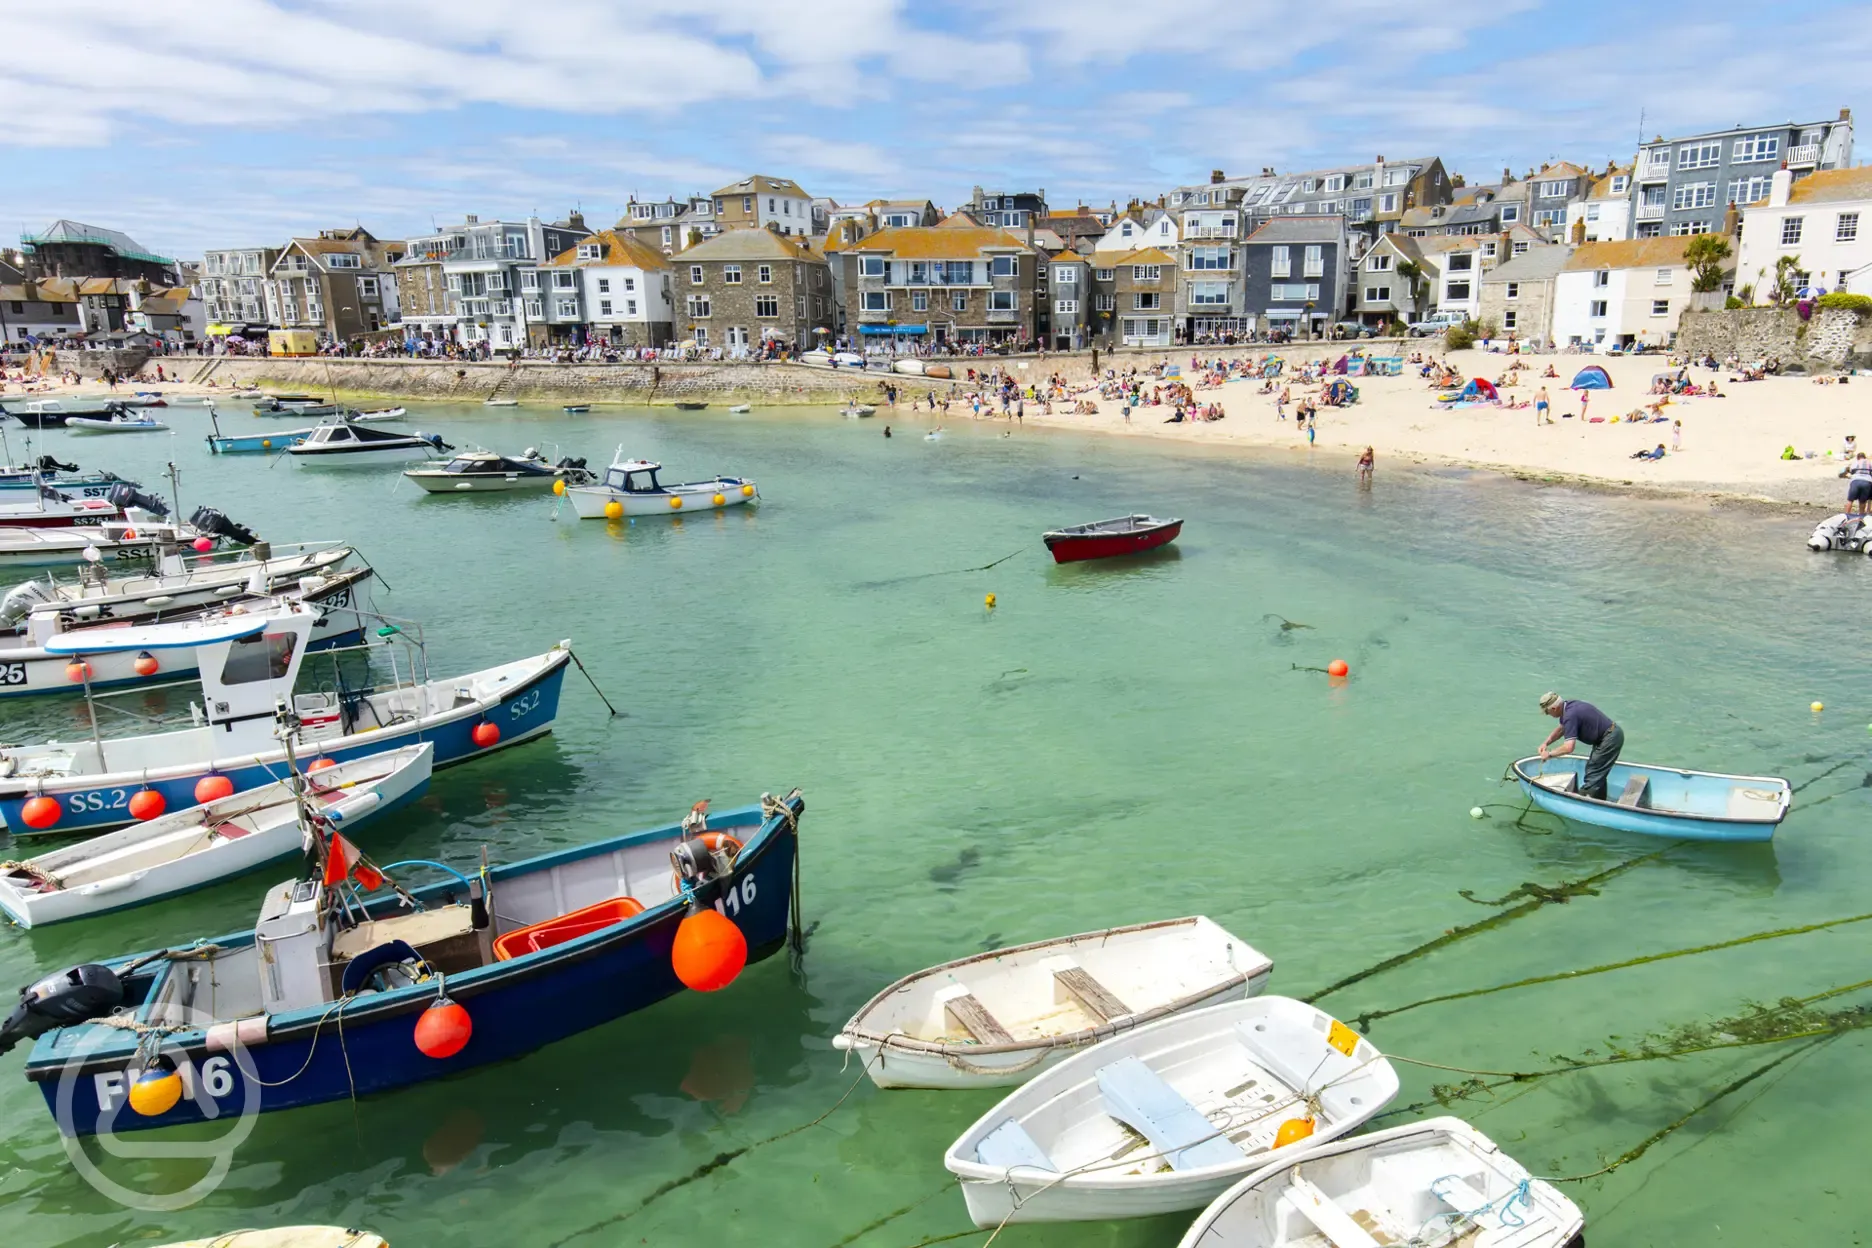 Nearby St Ives Harbour